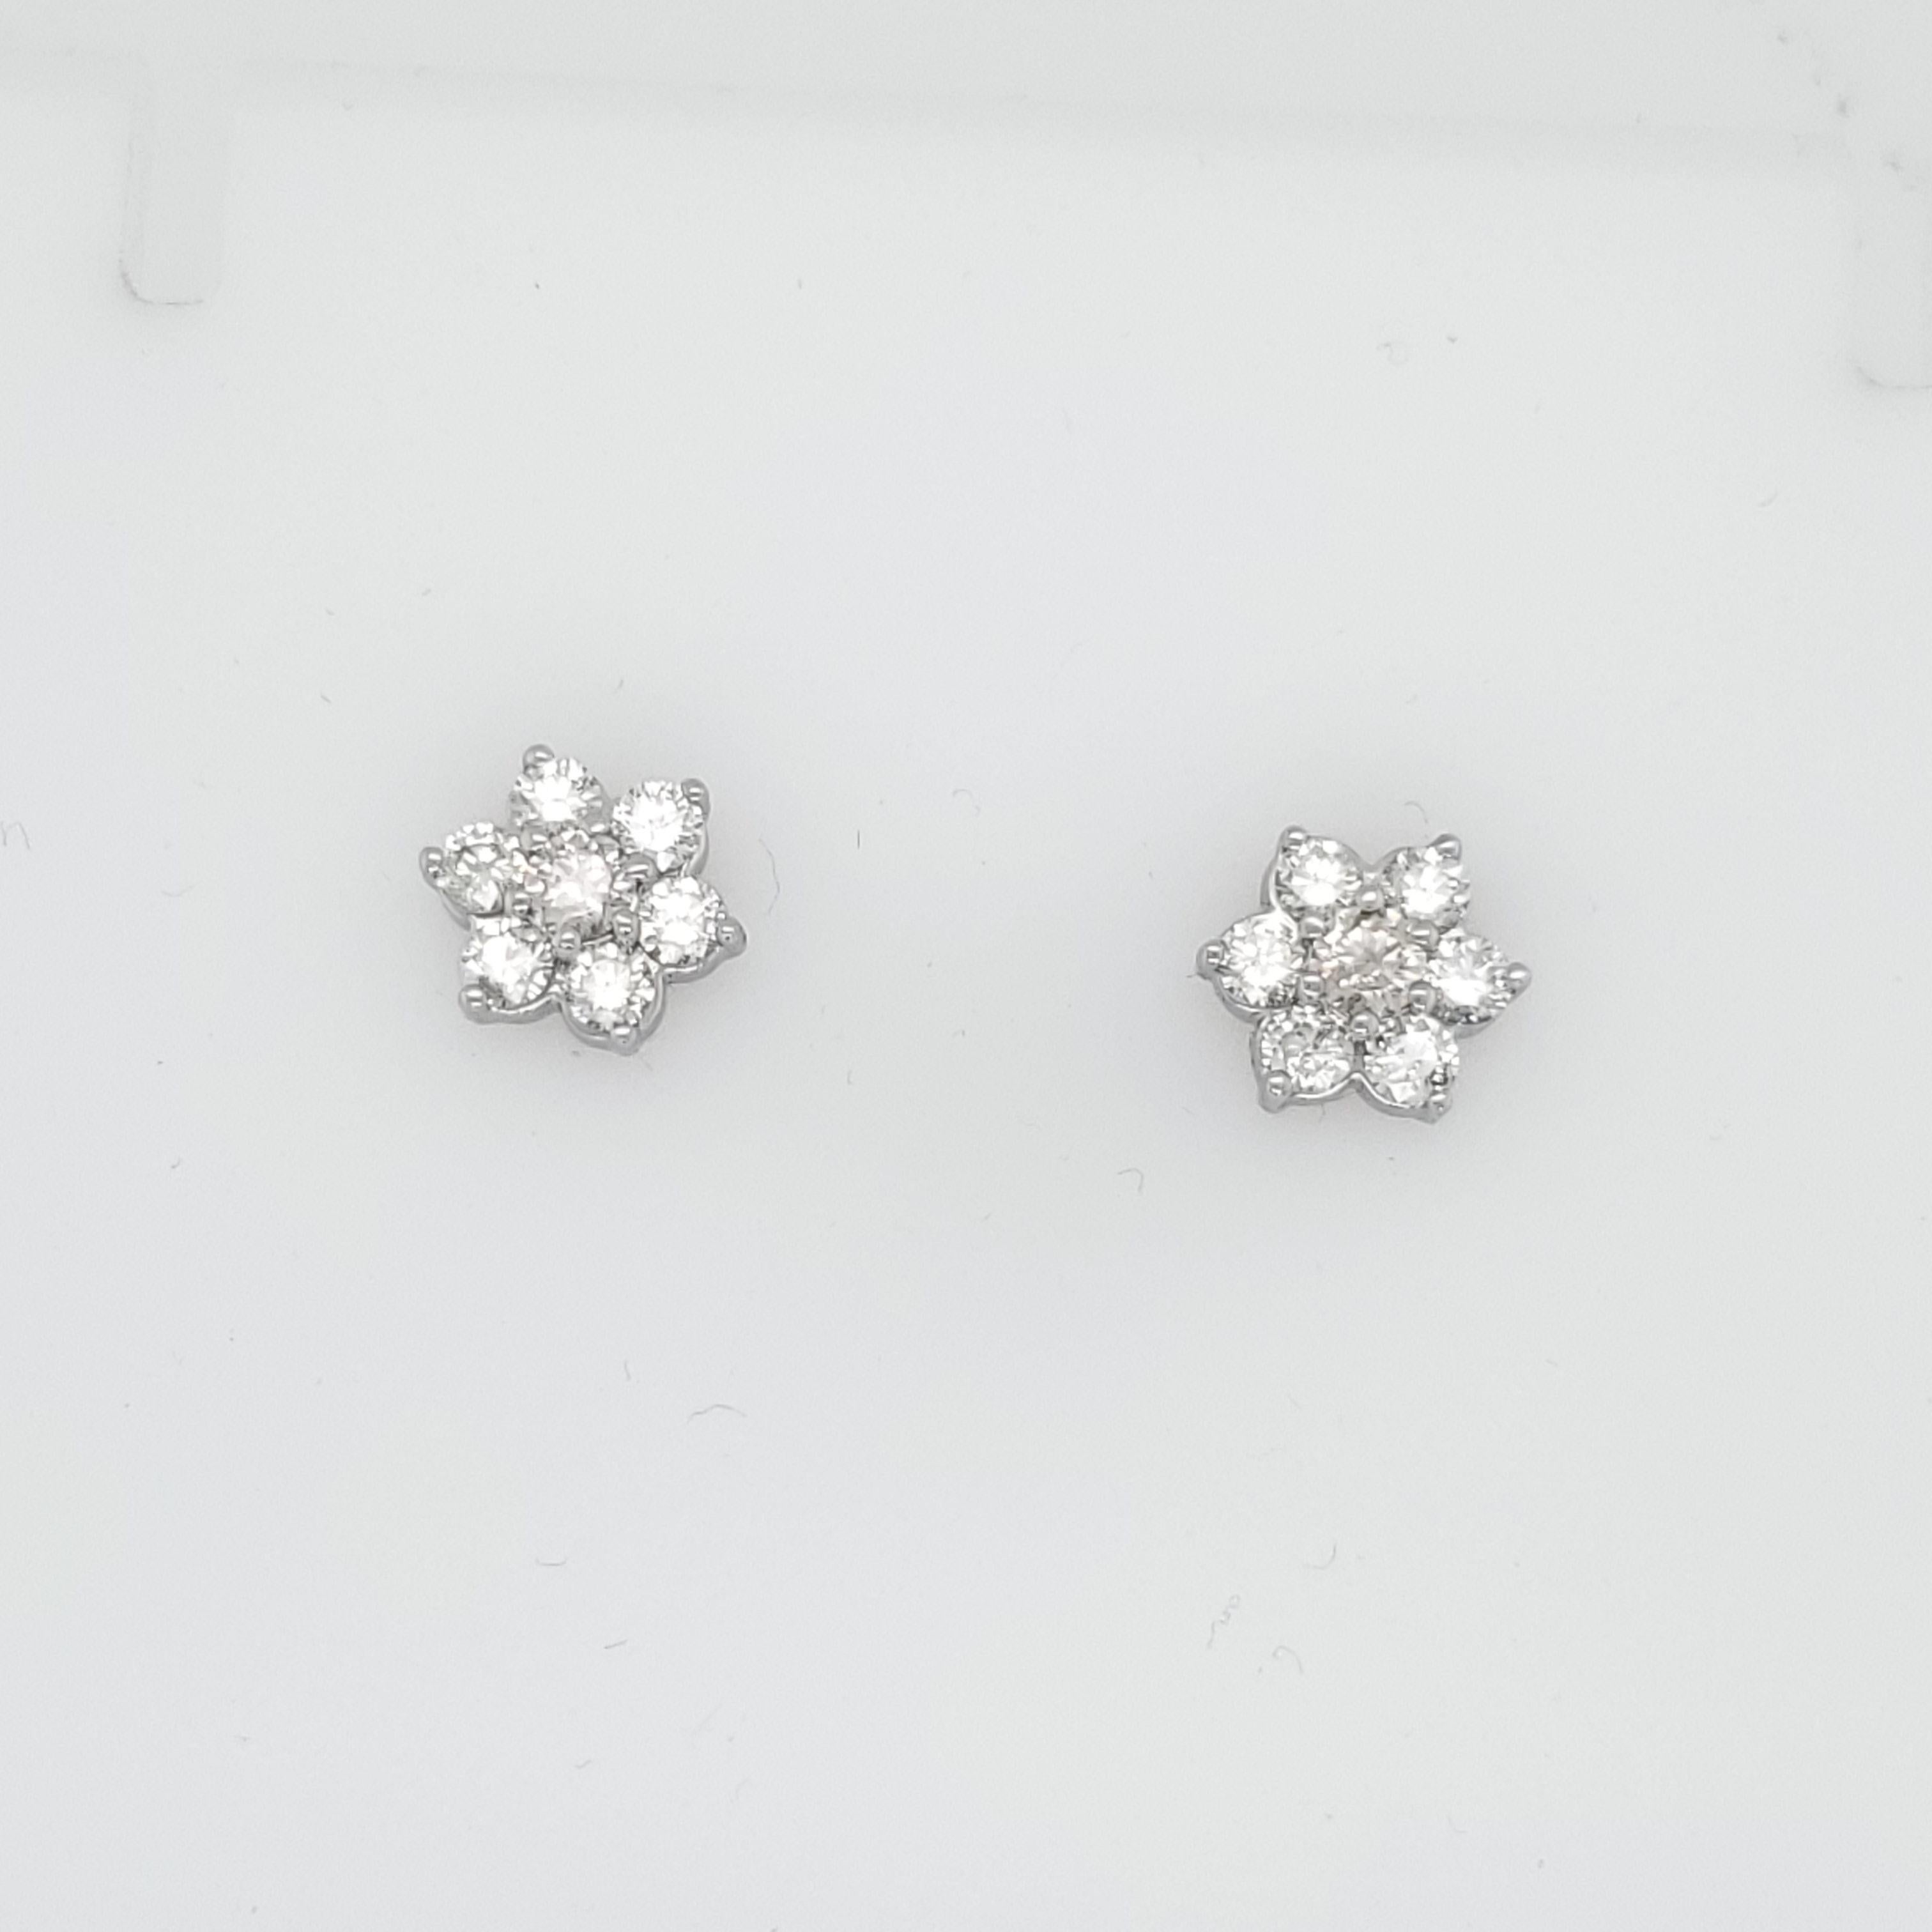 Cluster Flower Diamond Earrings with approximately 1.63 carats of white diamonds. We estimate G colors and SI clarity. All set in 14k white gold. 